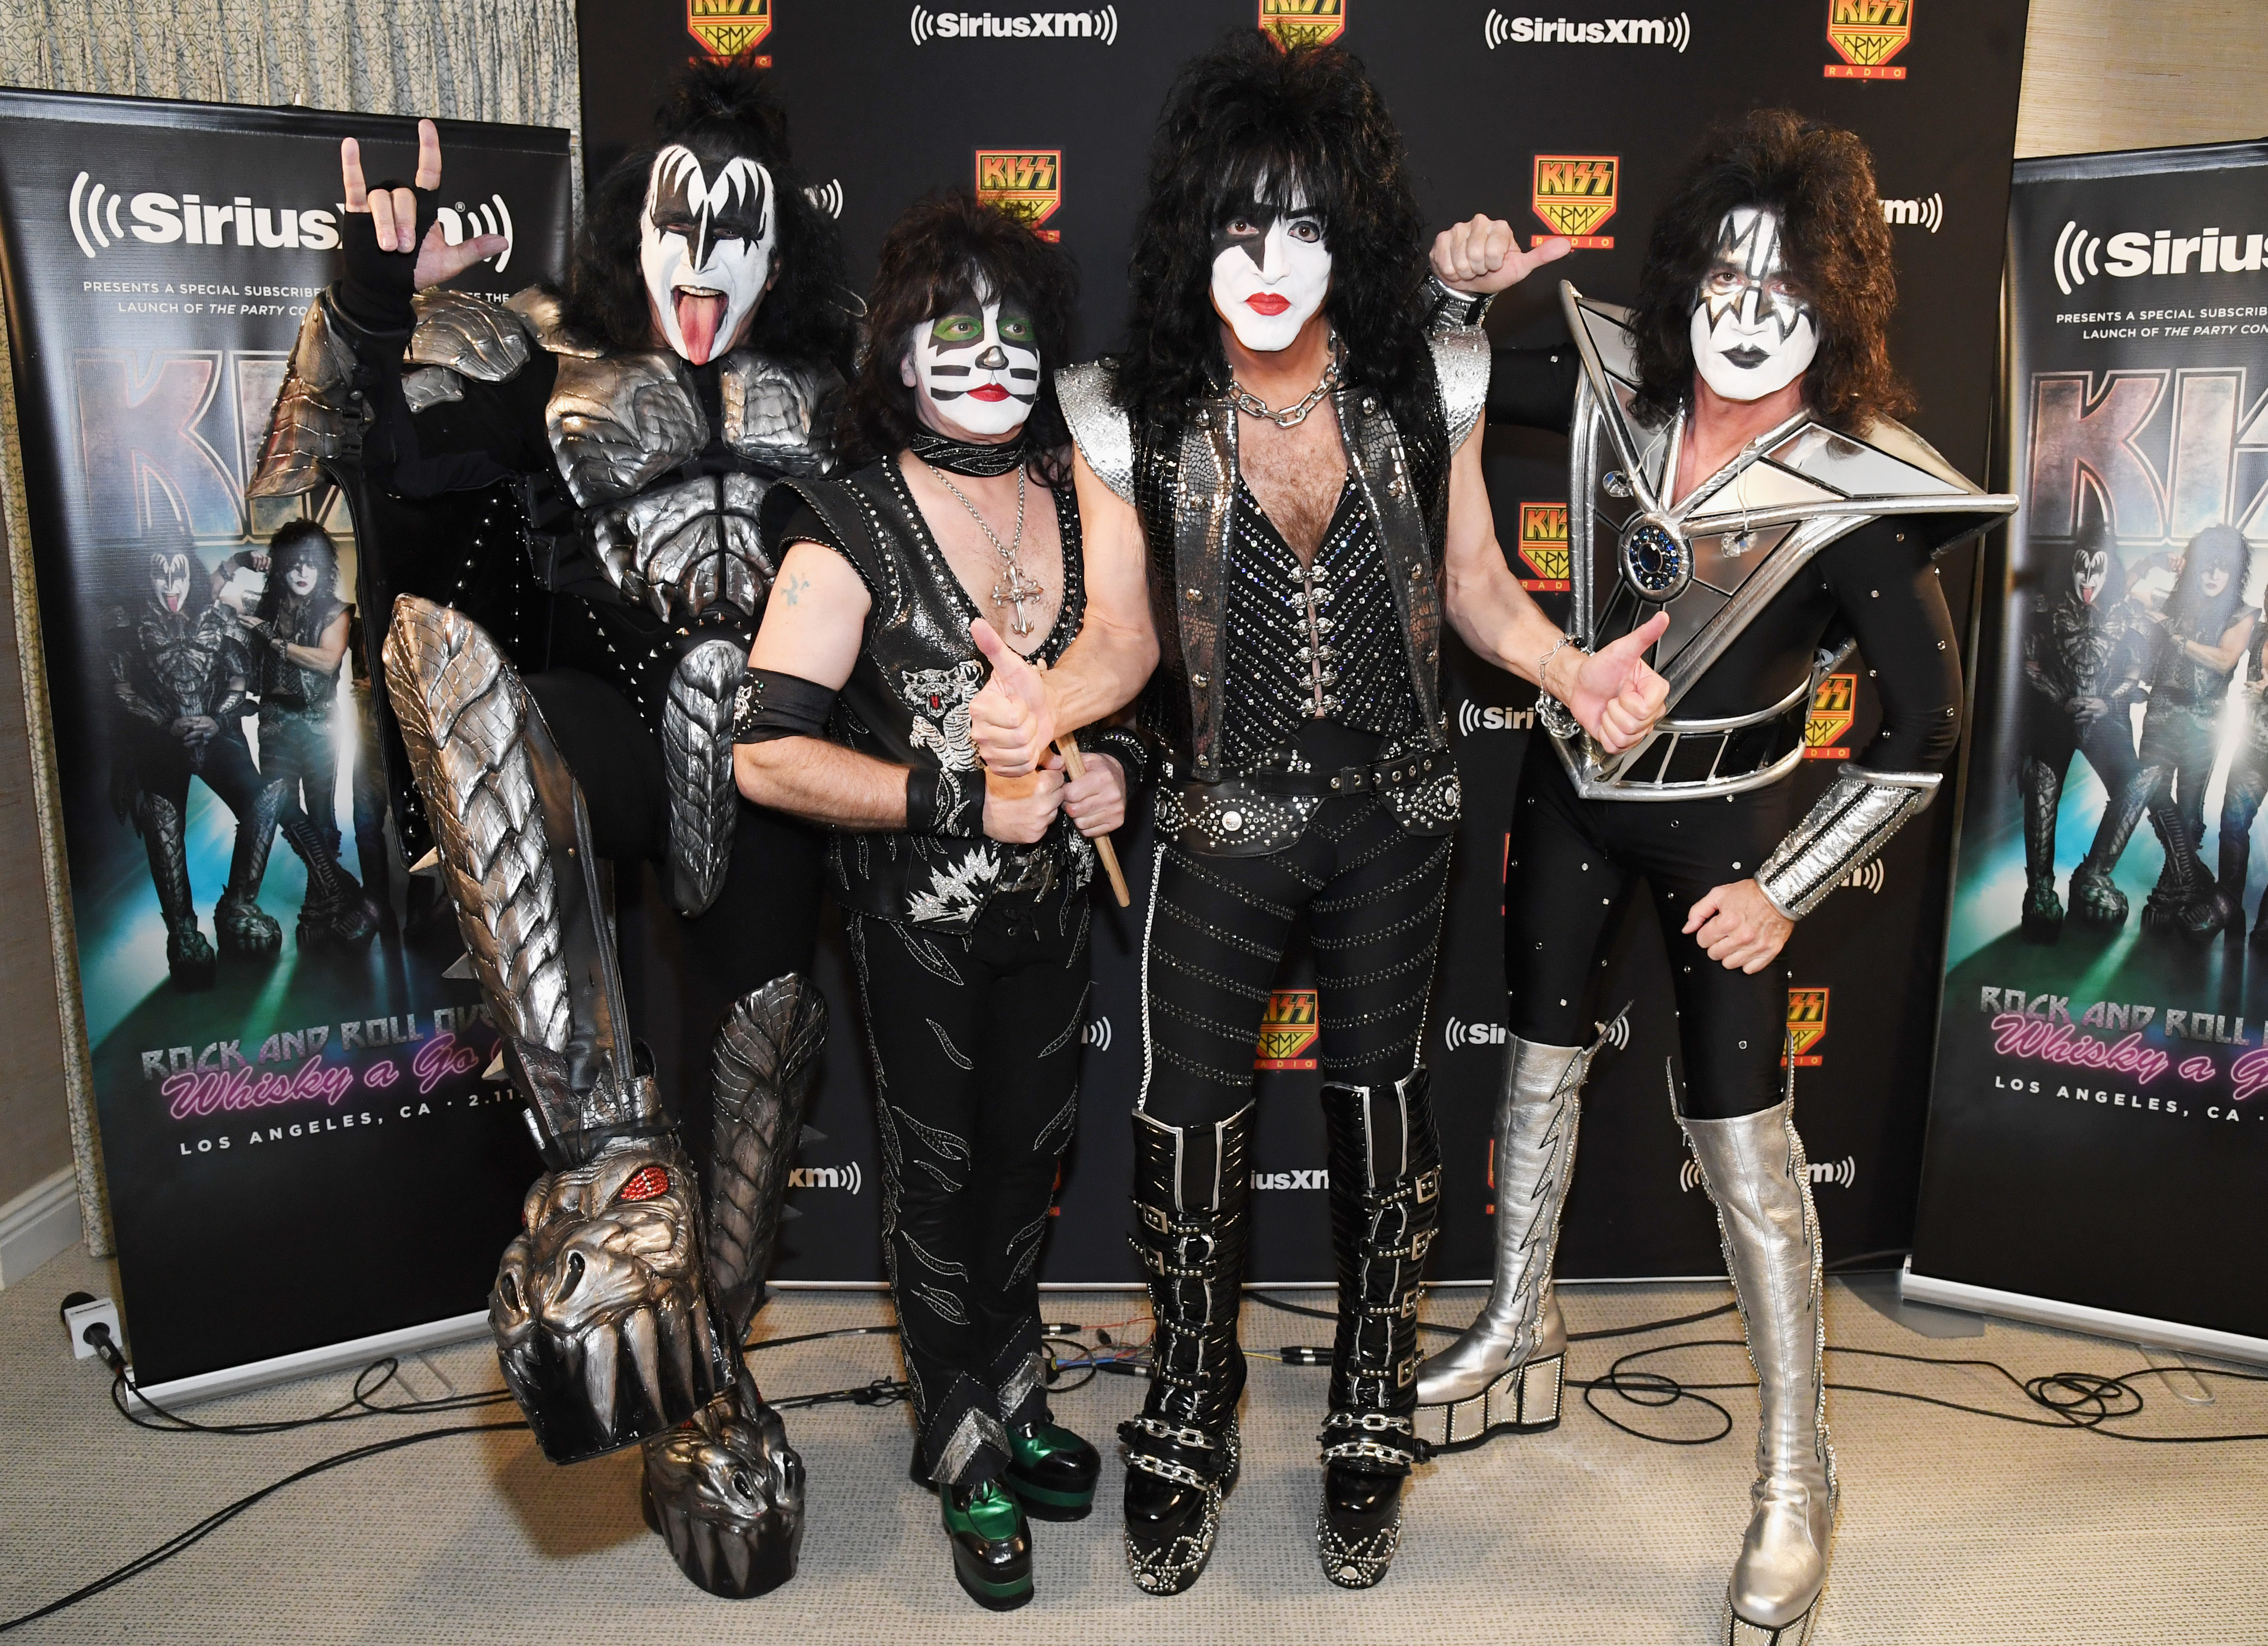 Gene Simmons, Eric Singer, Paul Stanley and Tommy Thayer of KISS during KISS Performs Private Concert For SiriusXM At Whisky A Go Go In Los Angeles at Whisky a Go Go on February 11, 2019 in West Hollywood, California | Source: Getty Images